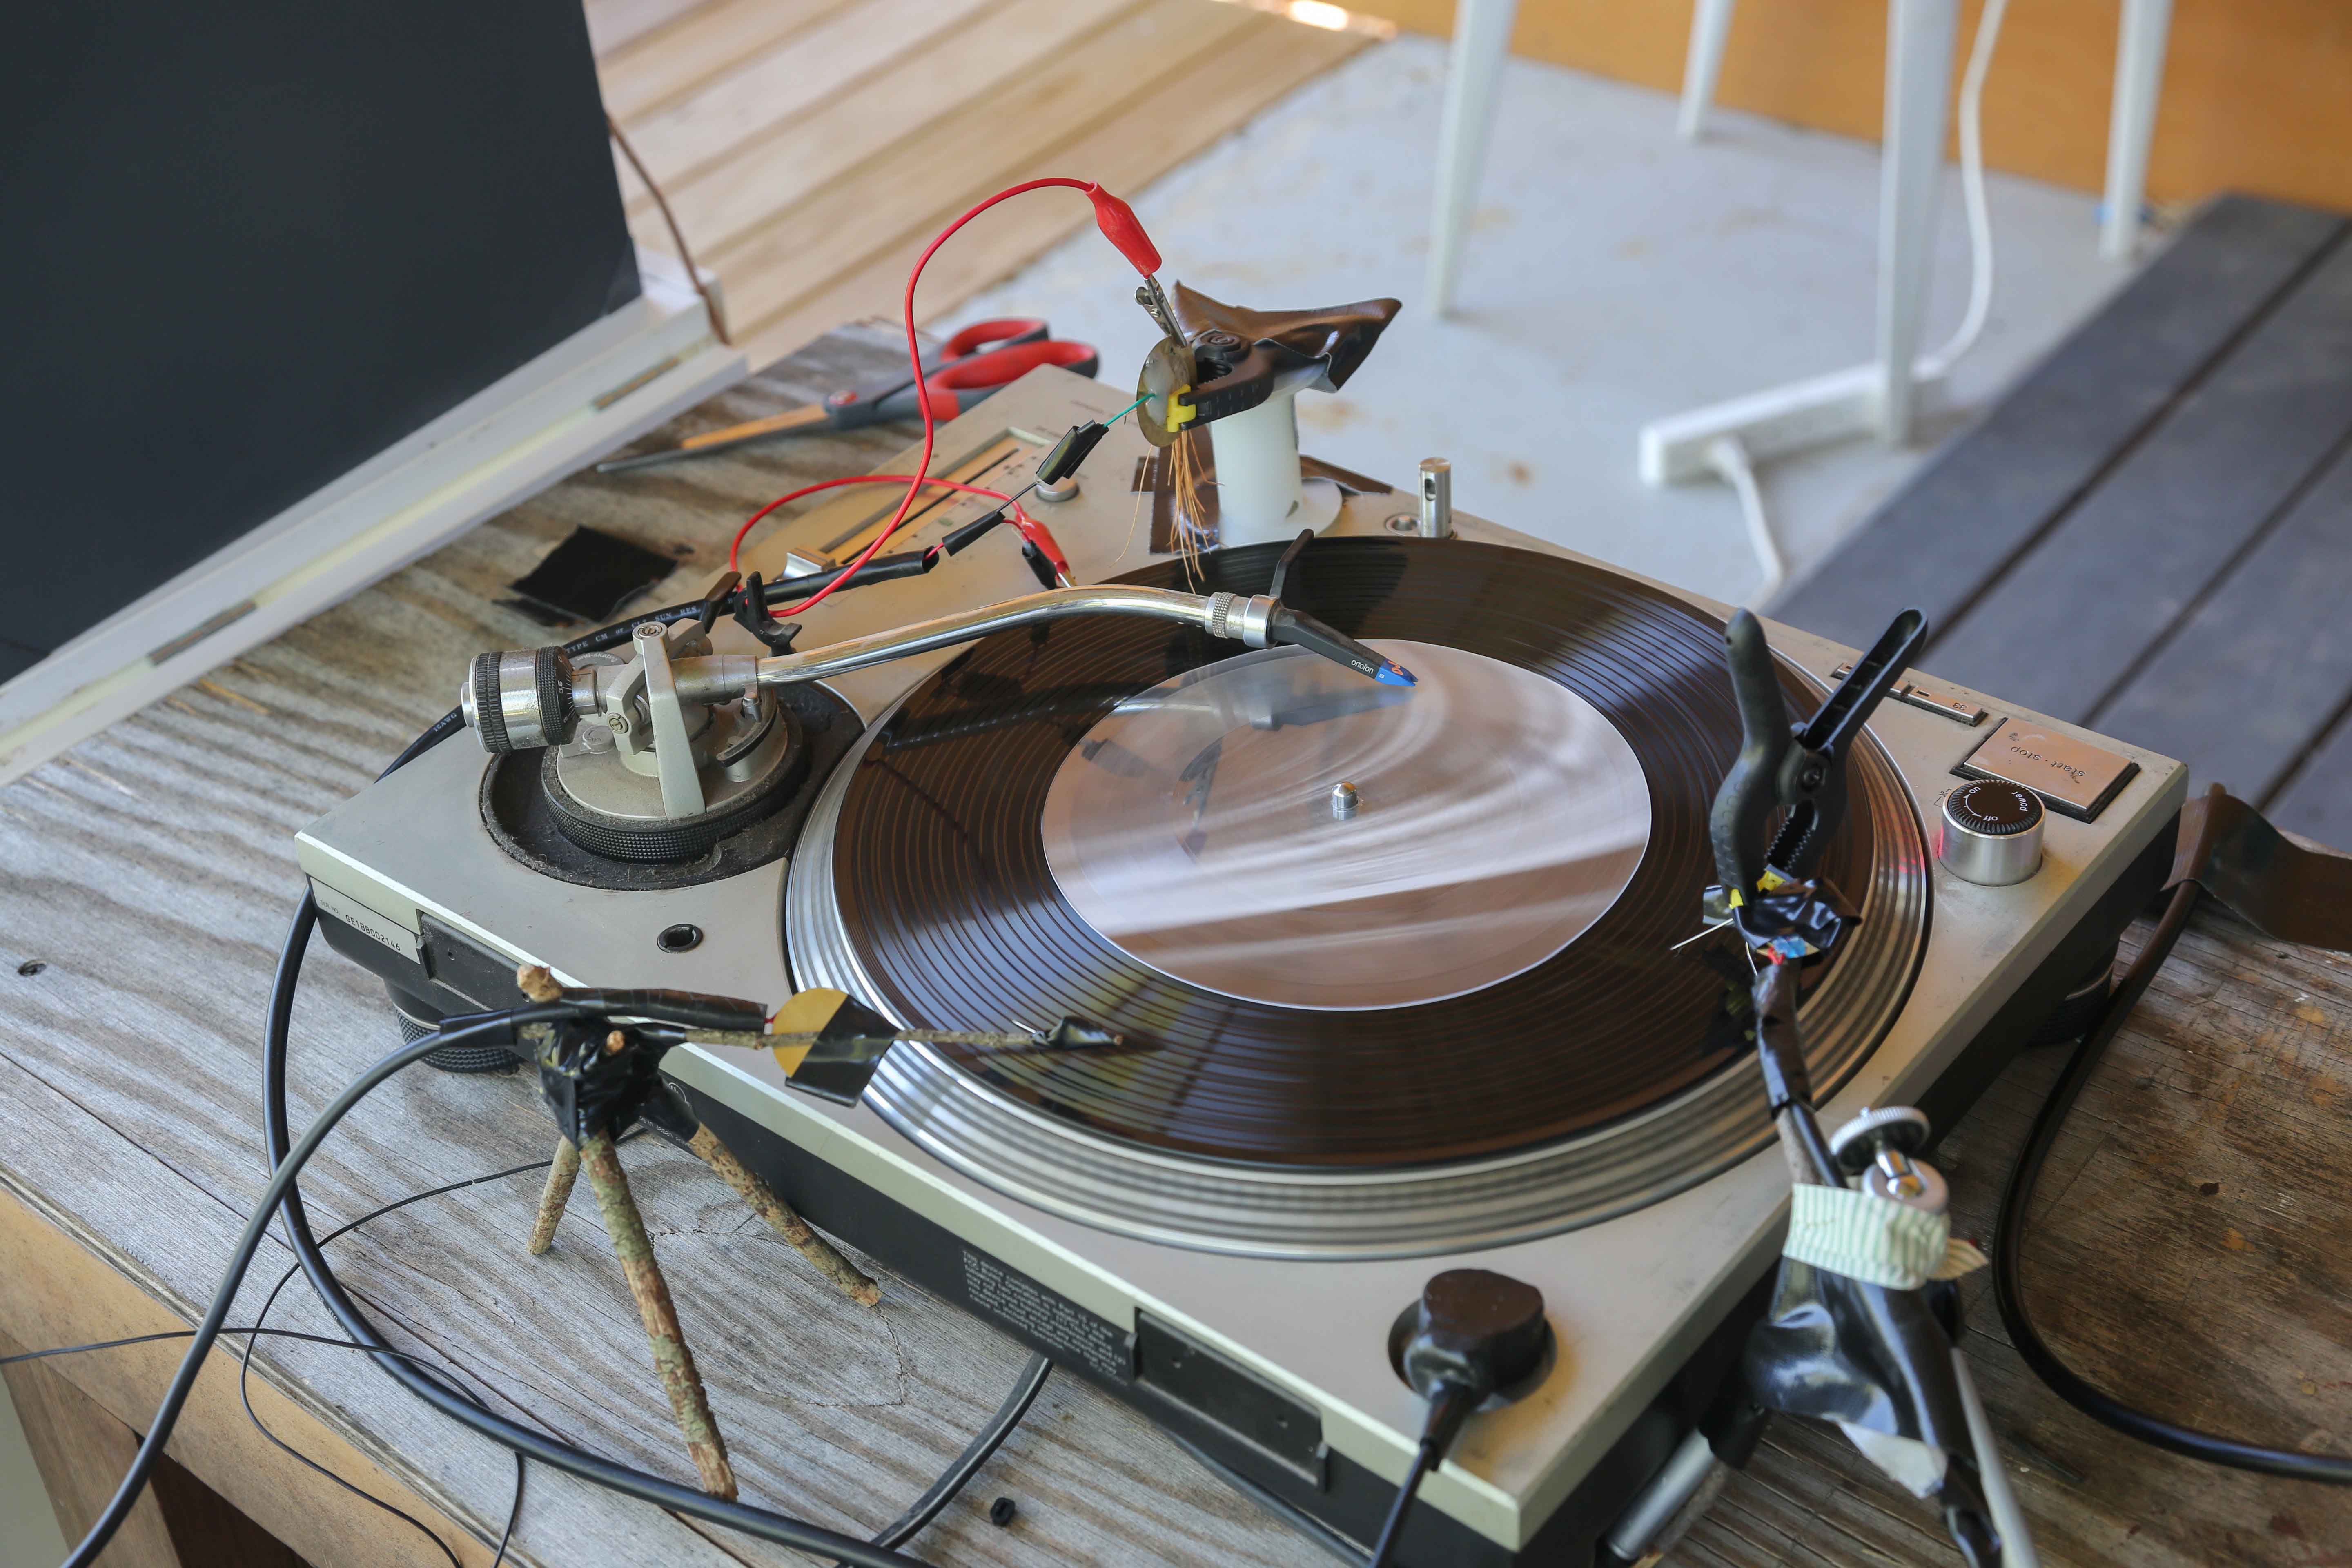 Closeup of Prepared Turntable as Part of “Seven Songs from Seven Planets and a Black Hole at the Heart of the Universe”